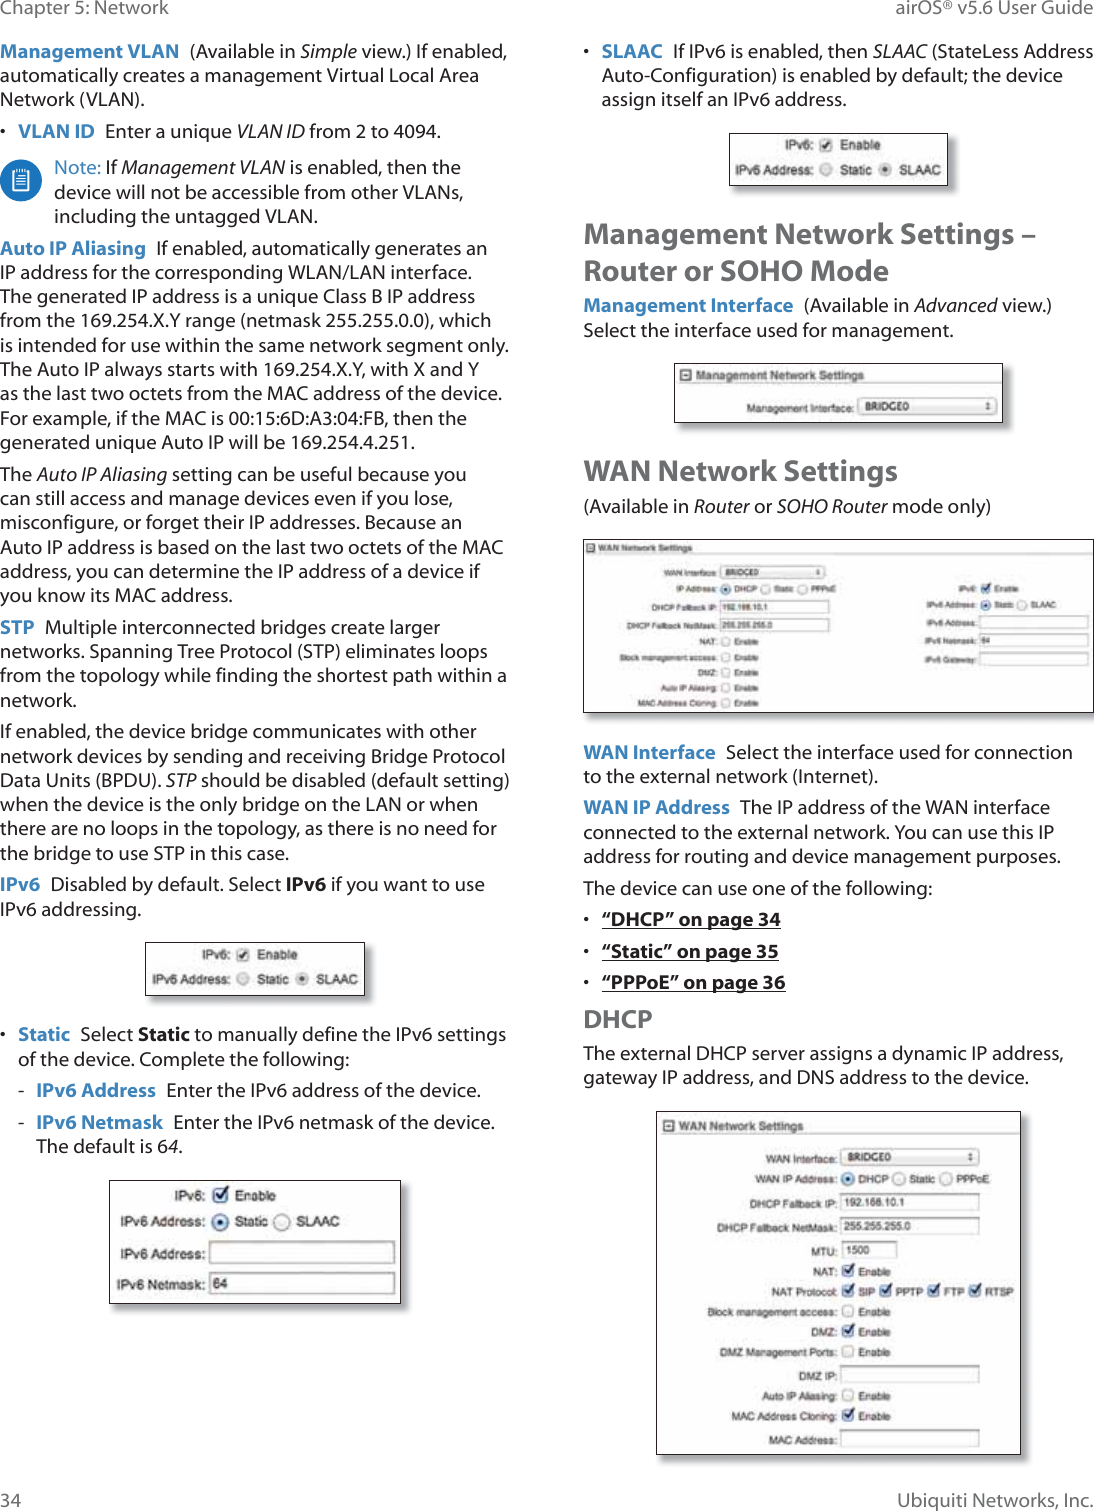 34Chapter 5: Network airOS® v5.6 User GuideUbiquiti Networks, Inc.Management VLAN  (Available in Simple view.) If enabled, automatically creates a management Virtual Local Area Network (VLAN). •  VLAN ID  Enter a unique VLAN ID from 2 to 4094. Note: If Management VLAN is enabled, then the device will not be accessible from other VLANs, including the untagged VLAN.Auto IP Aliasing  If enabled, automatically generates an IP address for the corresponding WLAN/LAN interface. The generated IP address is a unique Class B IP address from the 169.254.X.Y range (netmask 255.255.0.0), which is intended for use within the same network segment only. The Auto IP always starts with 169.254.X.Y, with X and Y as the last two octets from the MAC address of the device. For example, if the MAC is 00:15:6D:A3:04:FB, then the generated unique Auto IP will be 169.254.4.251.The Auto IP Aliasing setting can be useful because you can still access and manage devices even if you lose, misconfigure, or forget their IP addresses. Because an Auto IP address is based on the last two octets of the MAC address, you can determine the IP address of a device if you know its MAC address.STP  Multiple interconnected bridges create larger networks. Spanning Tree Protocol (STP) eliminates loops from the topology while finding the shortest path within a network.If enabled, the device bridge communicates with other network devices by sending and receiving Bridge Protocol Data Units (BPDU). STP should be disabled (default setting) when the device is the only bridge on the LAN or when there are no loops in the topology, as there is no need for the bridge to use STP in this case.IPv6  Disabled by default. Select IPv6 if you want to use IPv6 addressing.•  Static  Select Static to manually define the IPv6 settings of the device. Complete the following: - IPv6 Address  Enter the IPv6 address of the device. - IPv6 Netmask  Enter the IPv6 netmask of the device. The default is 64.•  SLAAC  If IPv6 is enabled, then SLAAC (StateLess Address Auto-Configuration) is enabled by default; the device assign itself an IPv6 address.Management Network Settings – Router or SOHO ModeManagement Interface  (Available in Advanced view.) Select the interface used for management.WAN Network Settings(Available in Router or SOHO Router mode only)WAN Interface  Select the interface used for connection to the external network (Internet).WAN IP Address  The IP address of the WAN interface connected to the external network. You can use this IP address for routing and device management purposes.The device can use one of the following:•  “DHCP” on page 34•  “Static” on page 35•  “PPPoE” on page 36DHCPThe external DHCP server assigns a dynamic IP address, gateway IP address, and DNS address to the device.